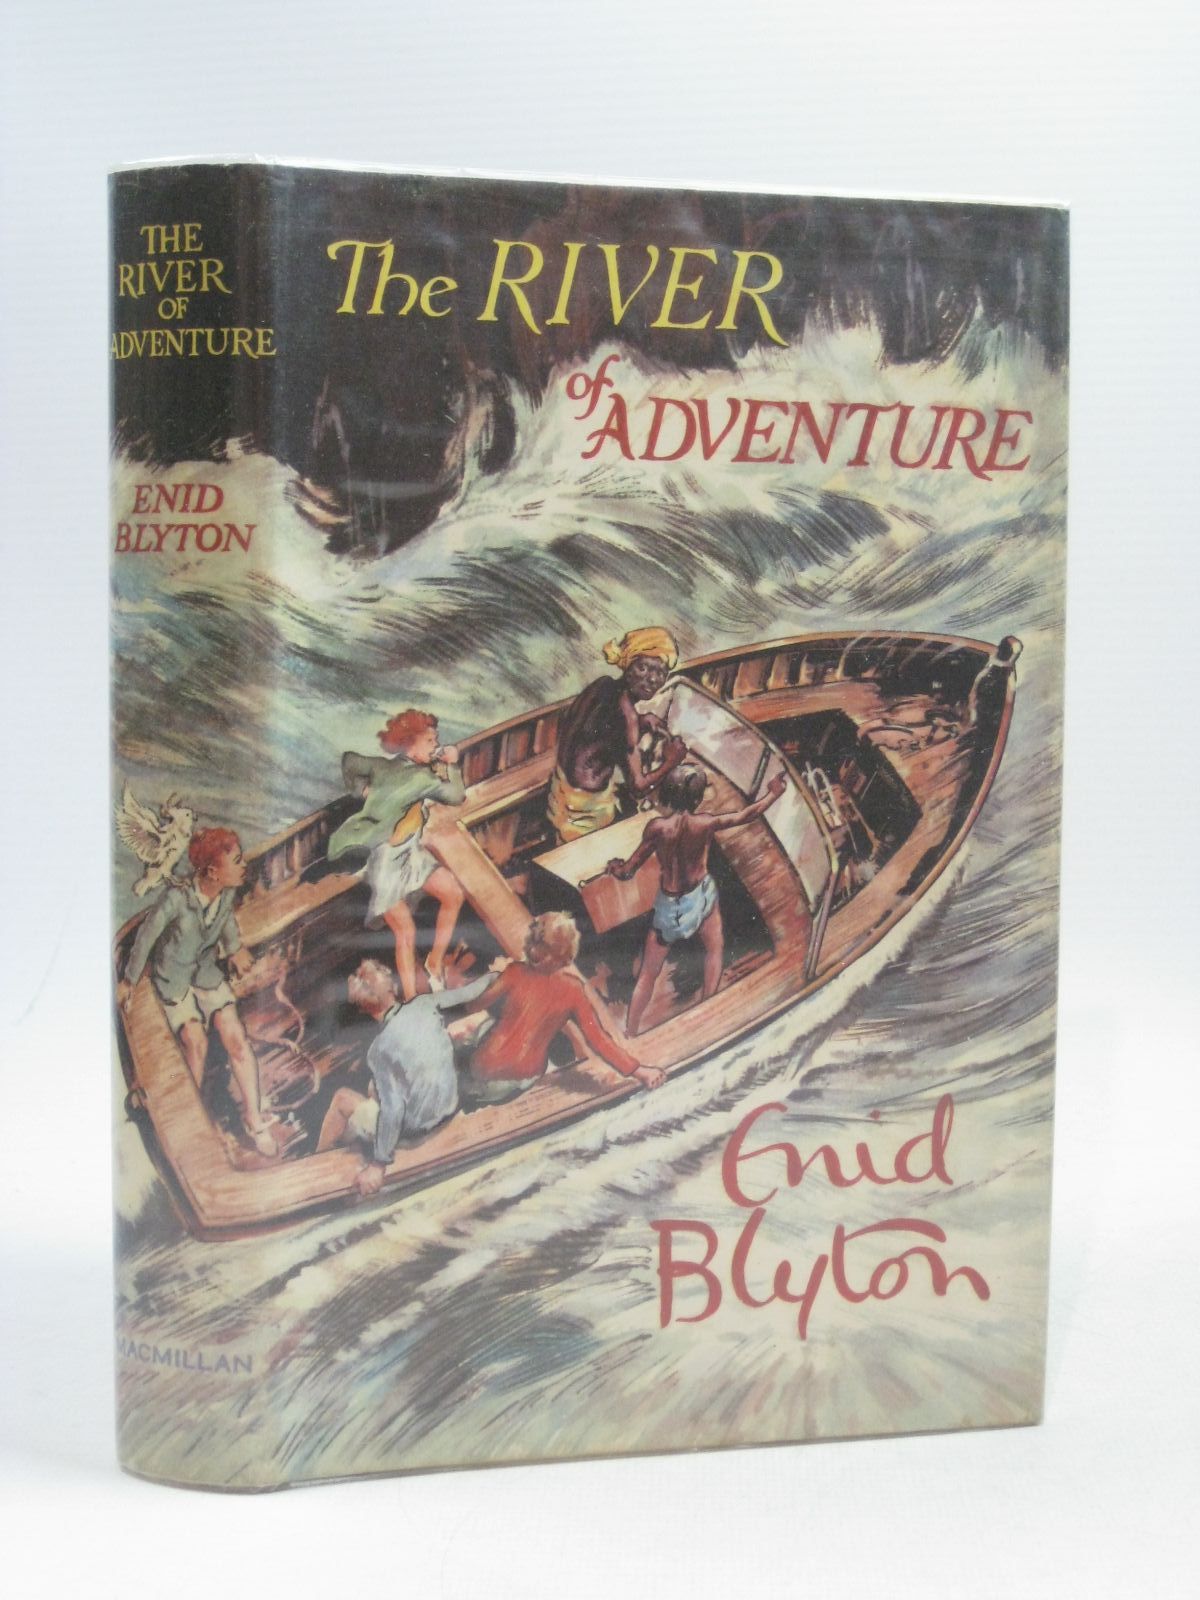 Cover of THE RIVER OF ADVENTURE by Enid Blyton